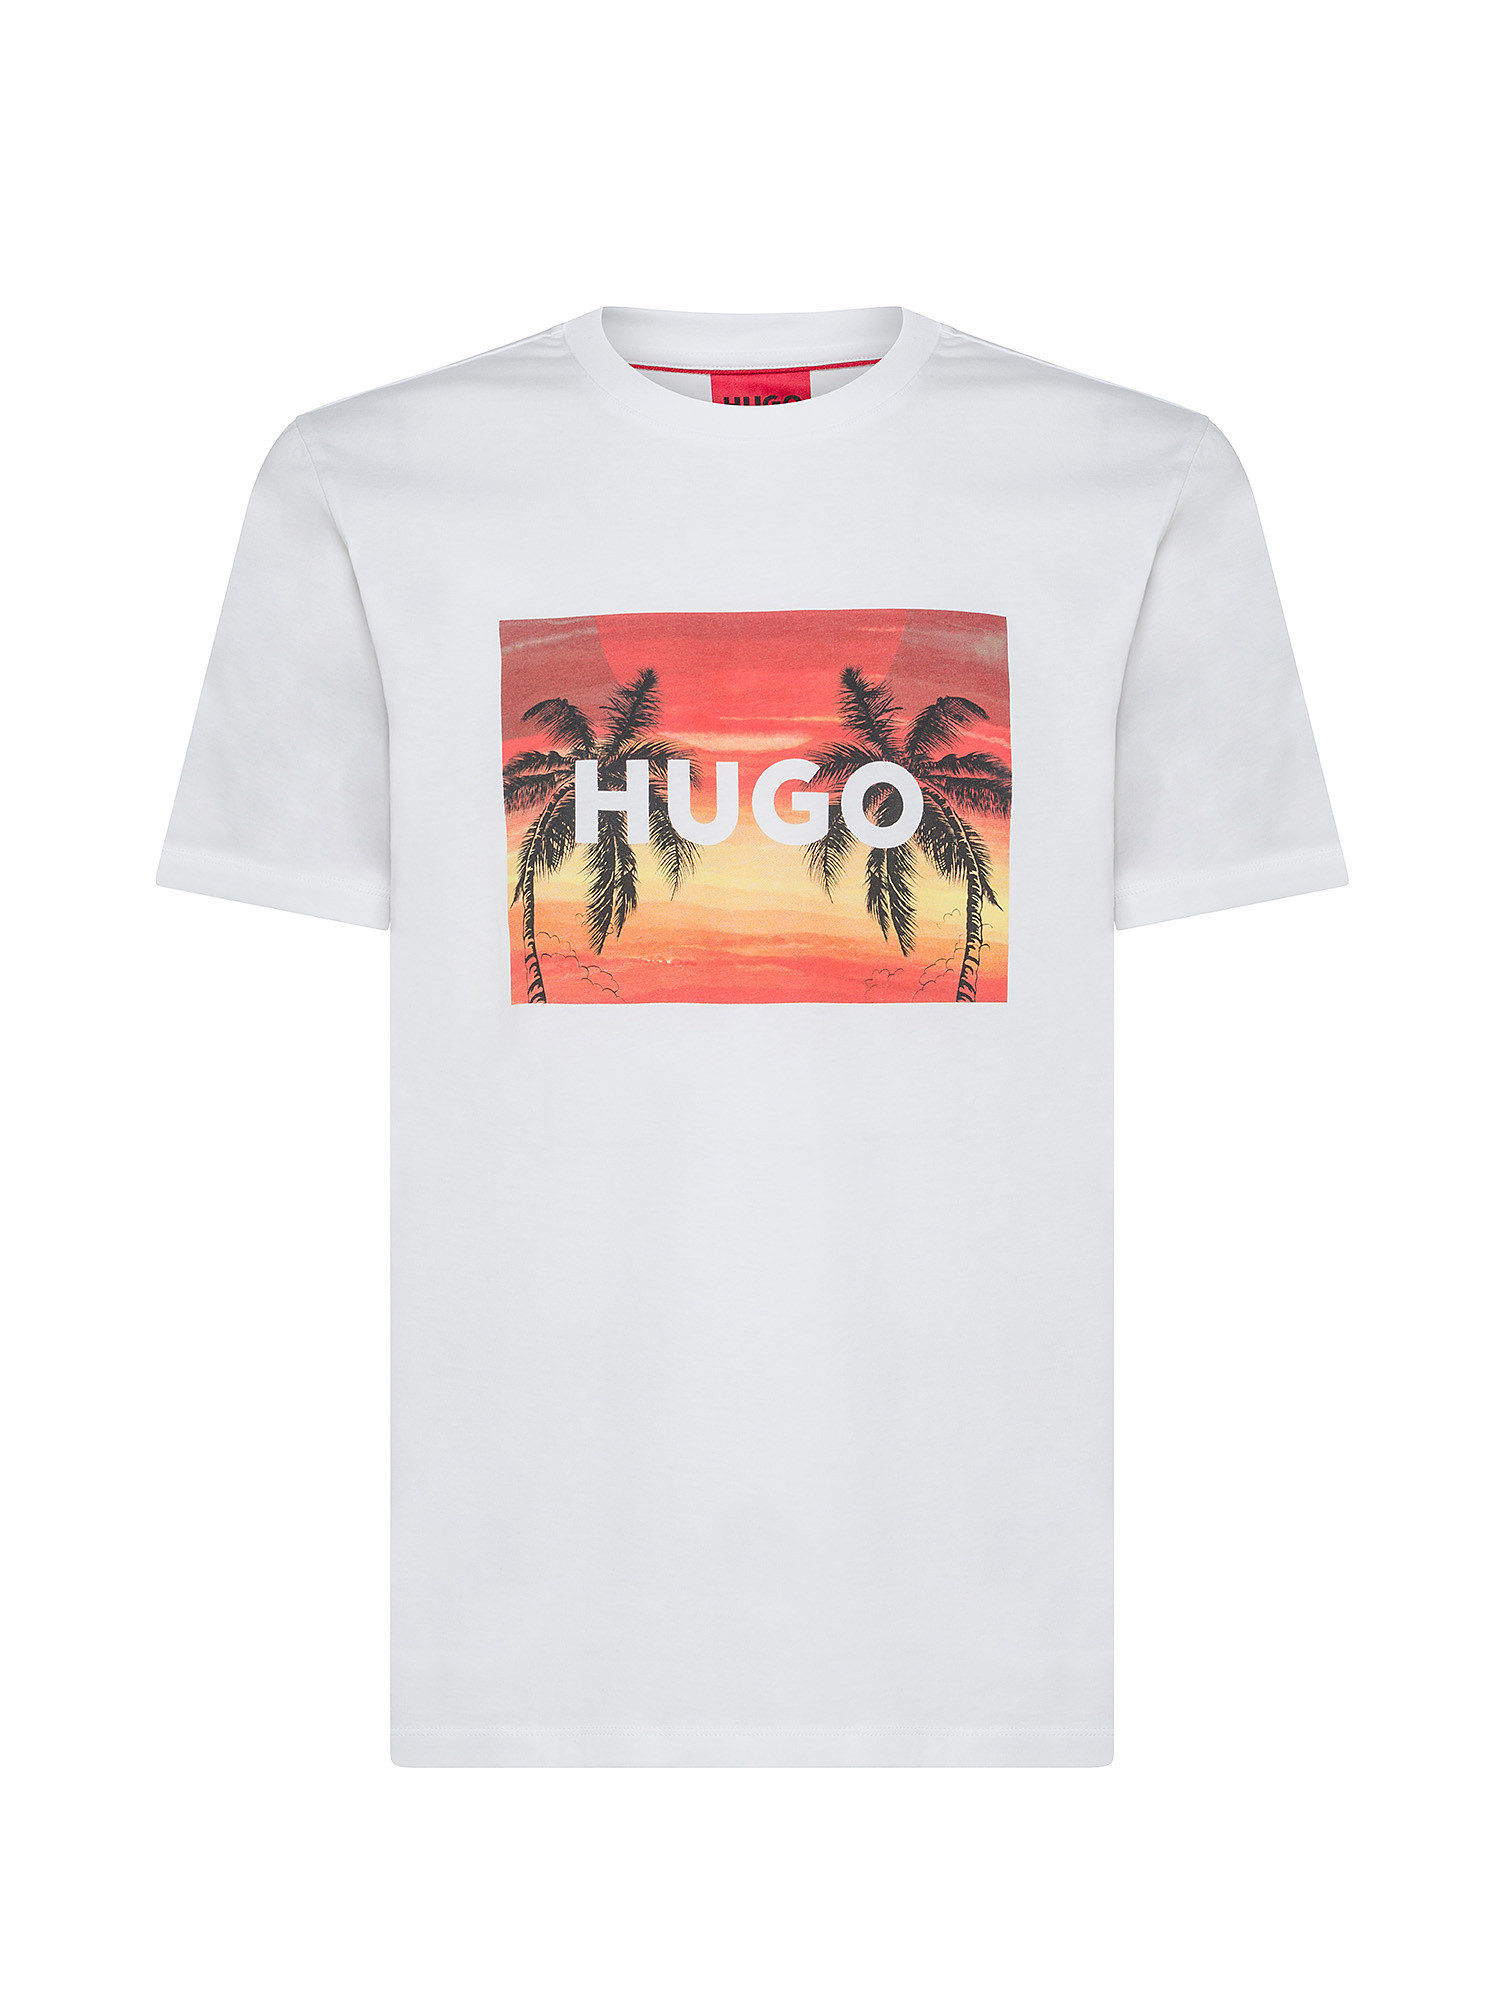 Hugo - T-shirt con stampa grafica in cotone, Bianco, large image number 0